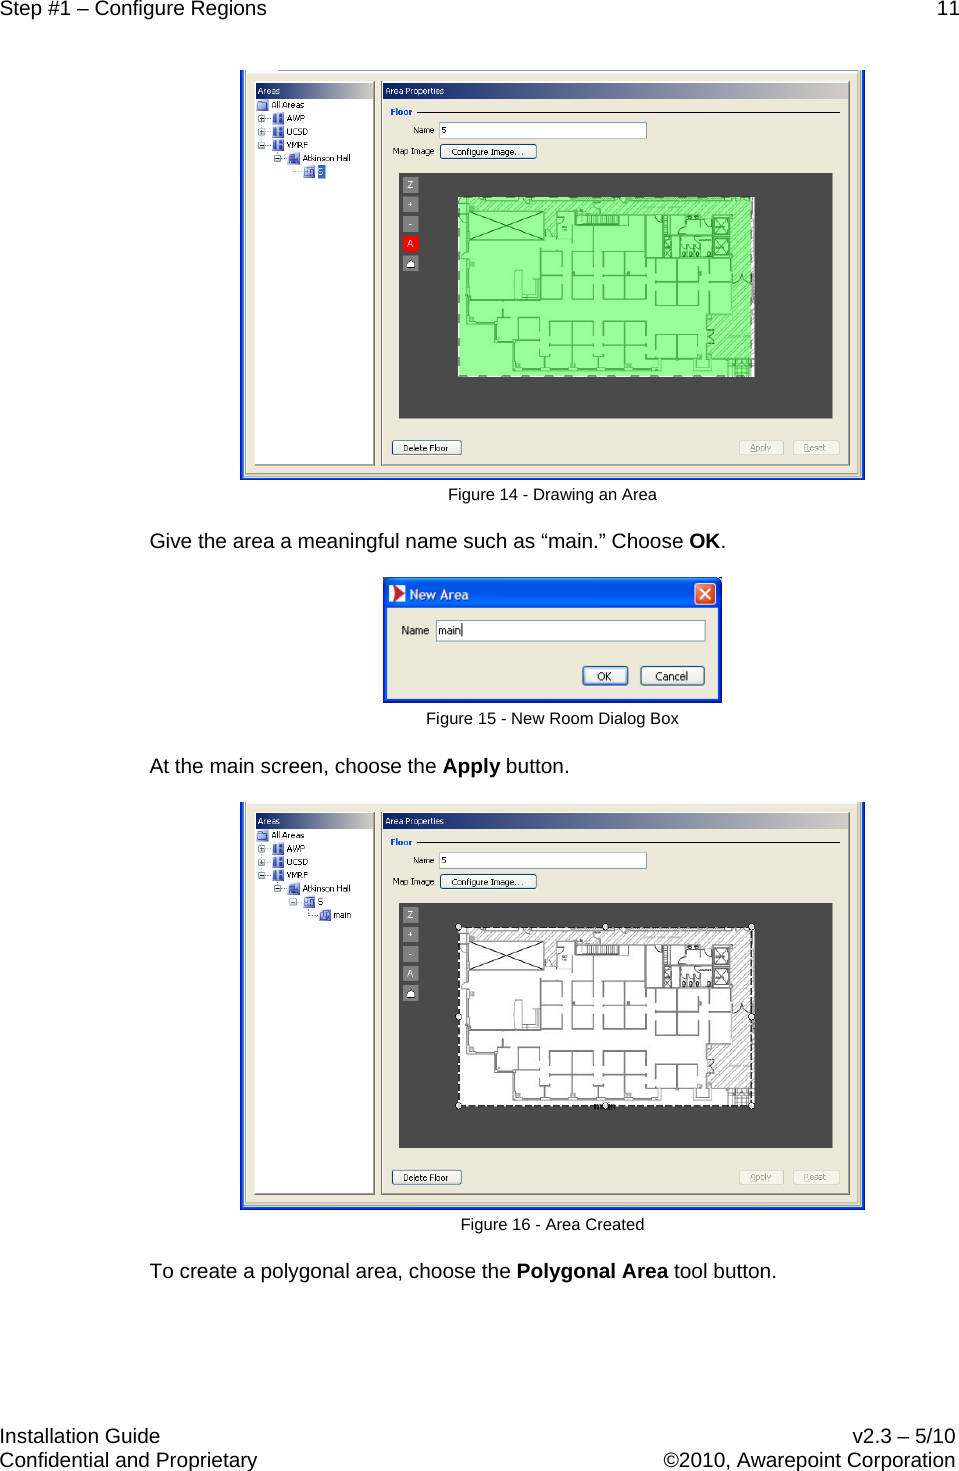 Step #1 – Configure Regions    11   Installation Guide    v2.3 – 5/10 Confidential and Proprietary    ©2010, Awarepoint Corporation   Figure 14 - Drawing an Area Give the area a meaningful name such as “main.” Choose OK.  Figure 15 - New Room Dialog Box At the main screen, choose the Apply button.  Figure 16 - Area Created To create a polygonal area, choose the Polygonal Area tool button. 